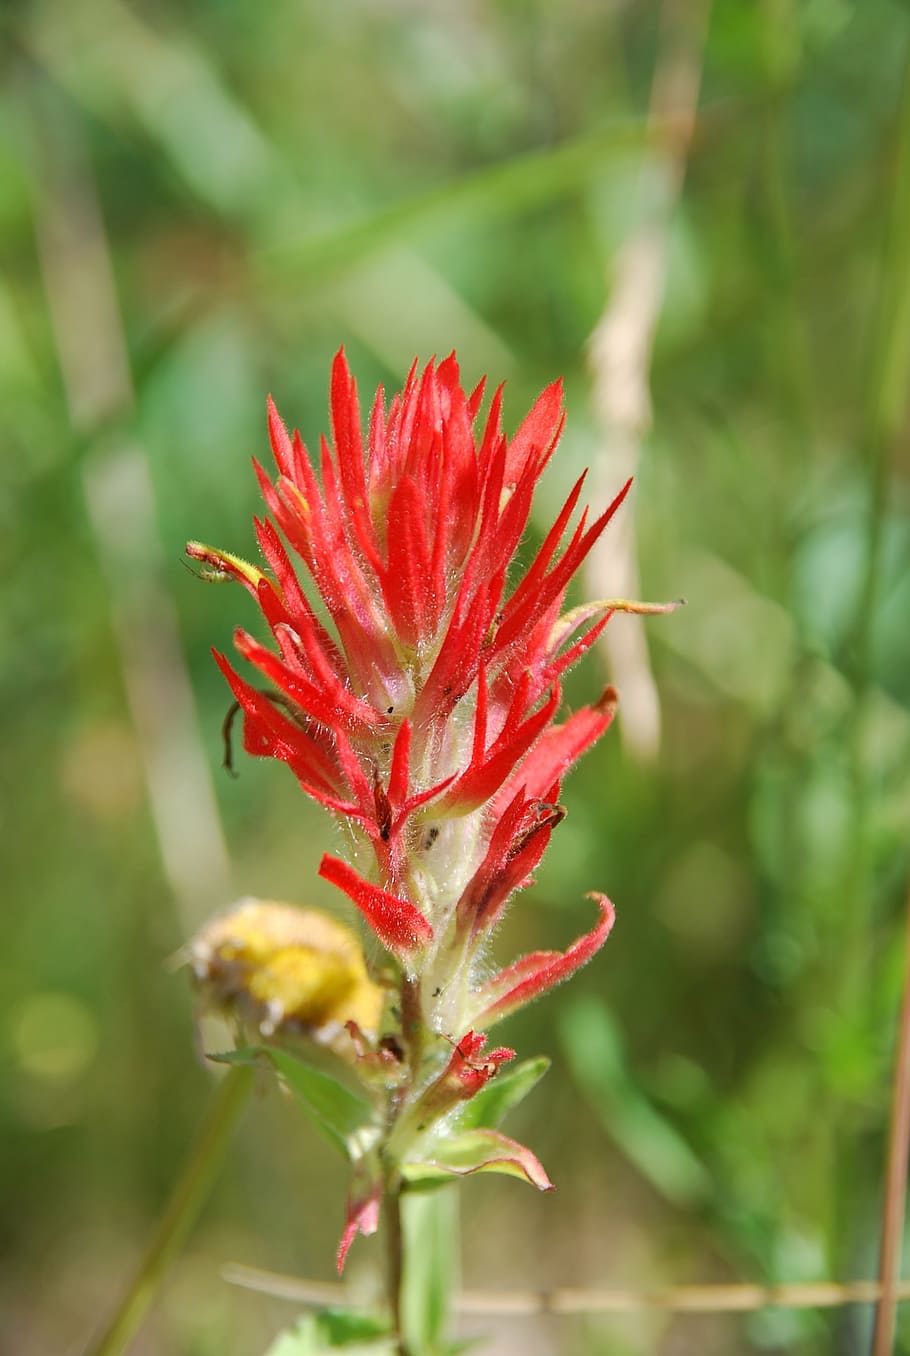 canada, nature, plant, flower, red, indian paintbrush, green, flowering plant, close-up, beauty in nature